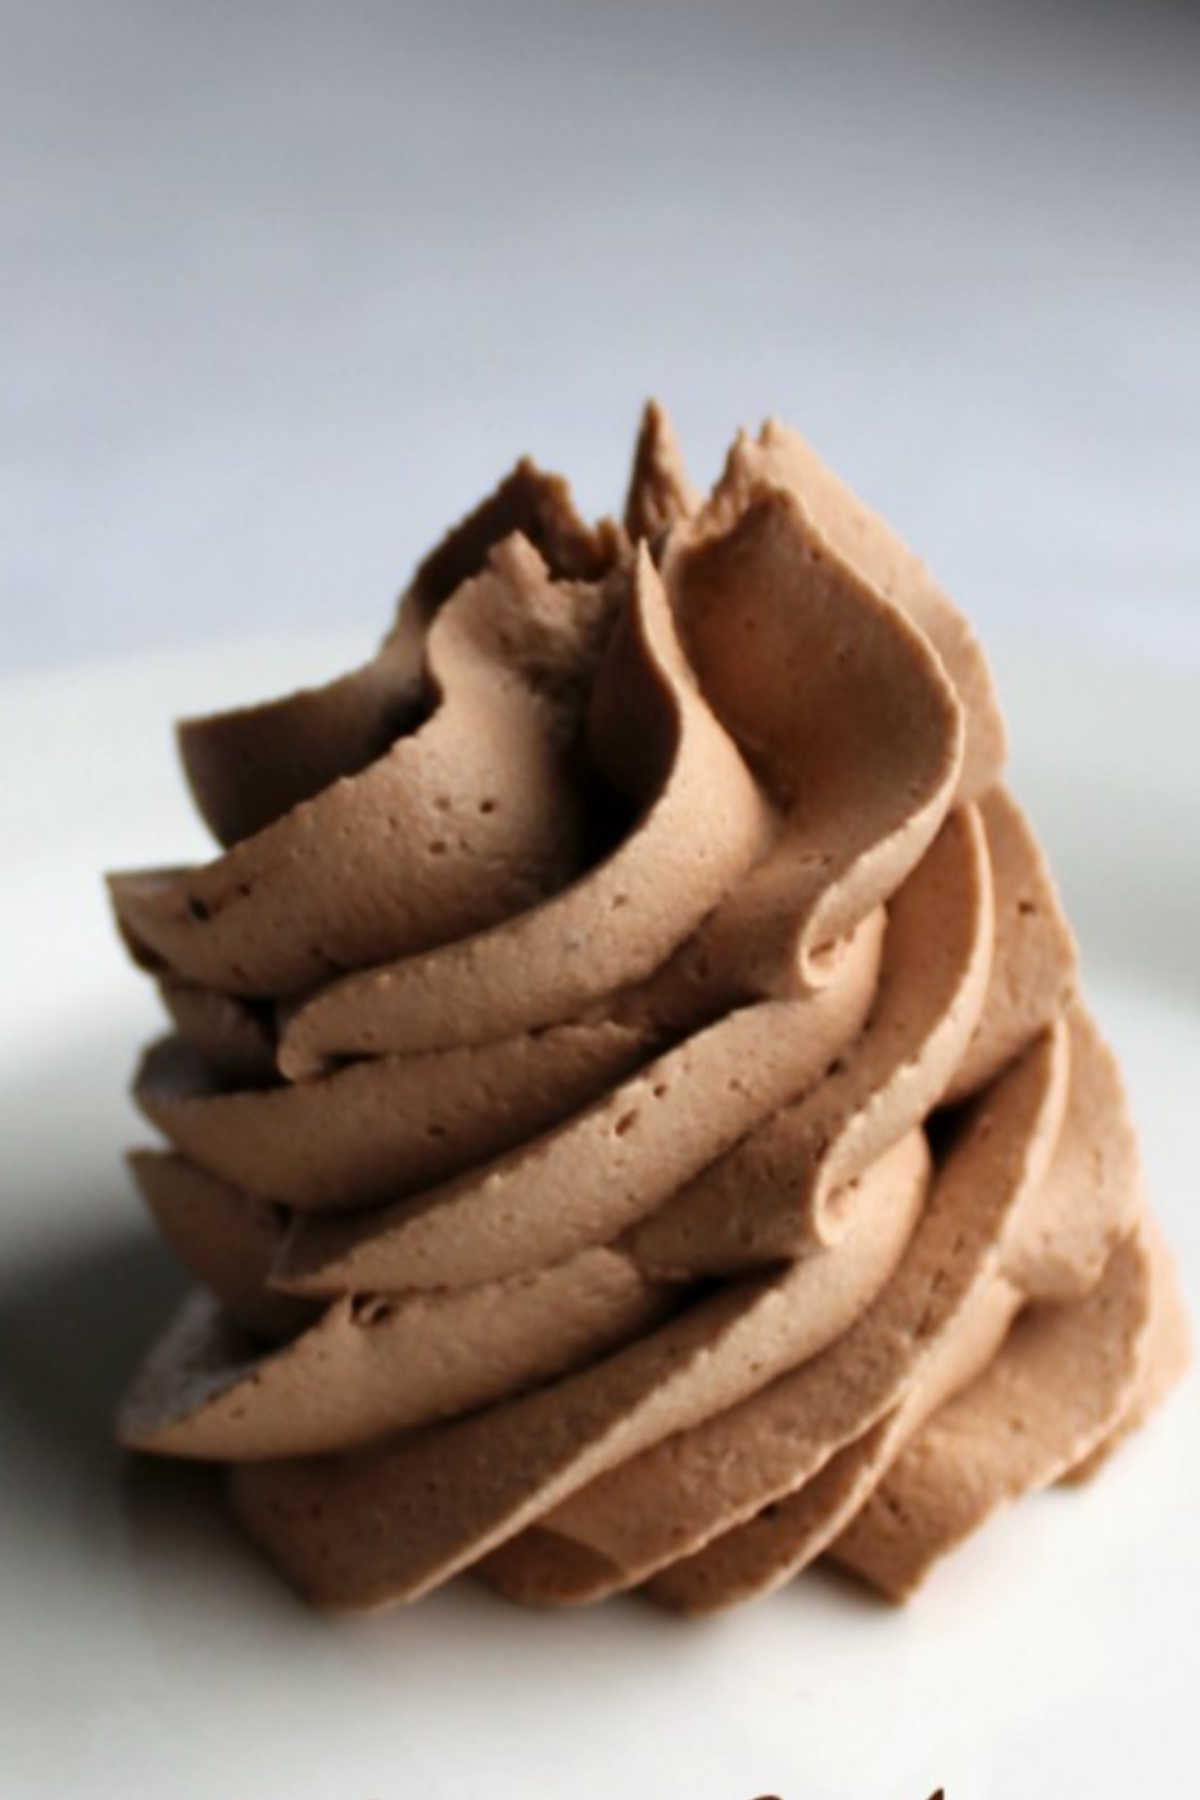 Piped swirl of lighter colored chocolate buttercream frosting.